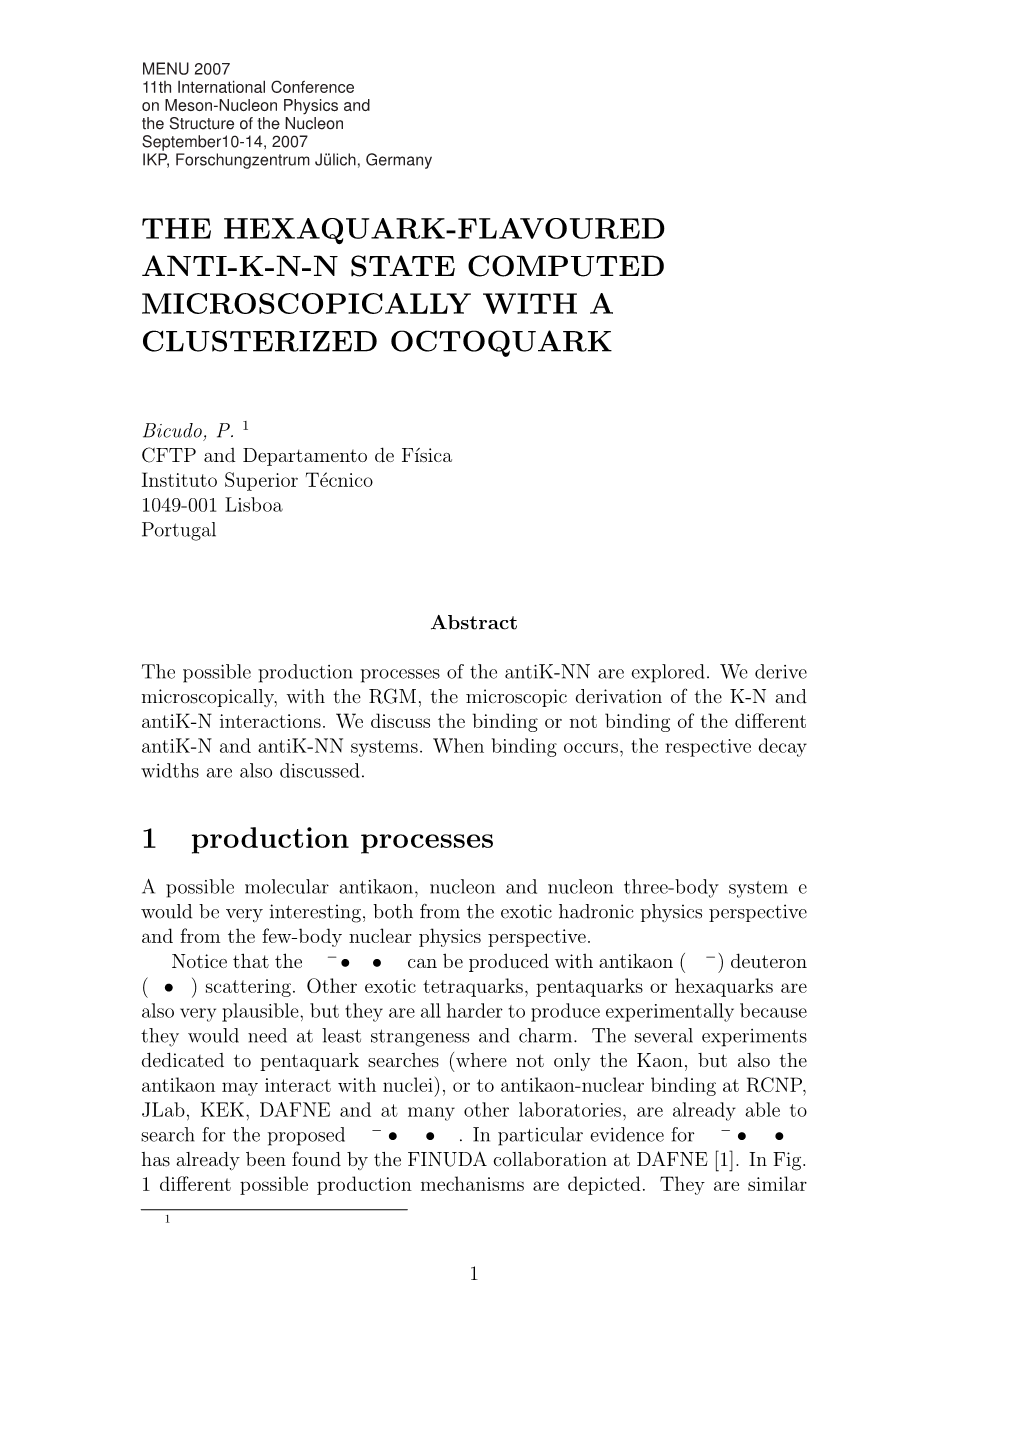 The Hexaquark-Flavoured Anti-K-N-N State Computed Microscopically with a Clusterized Octoquark